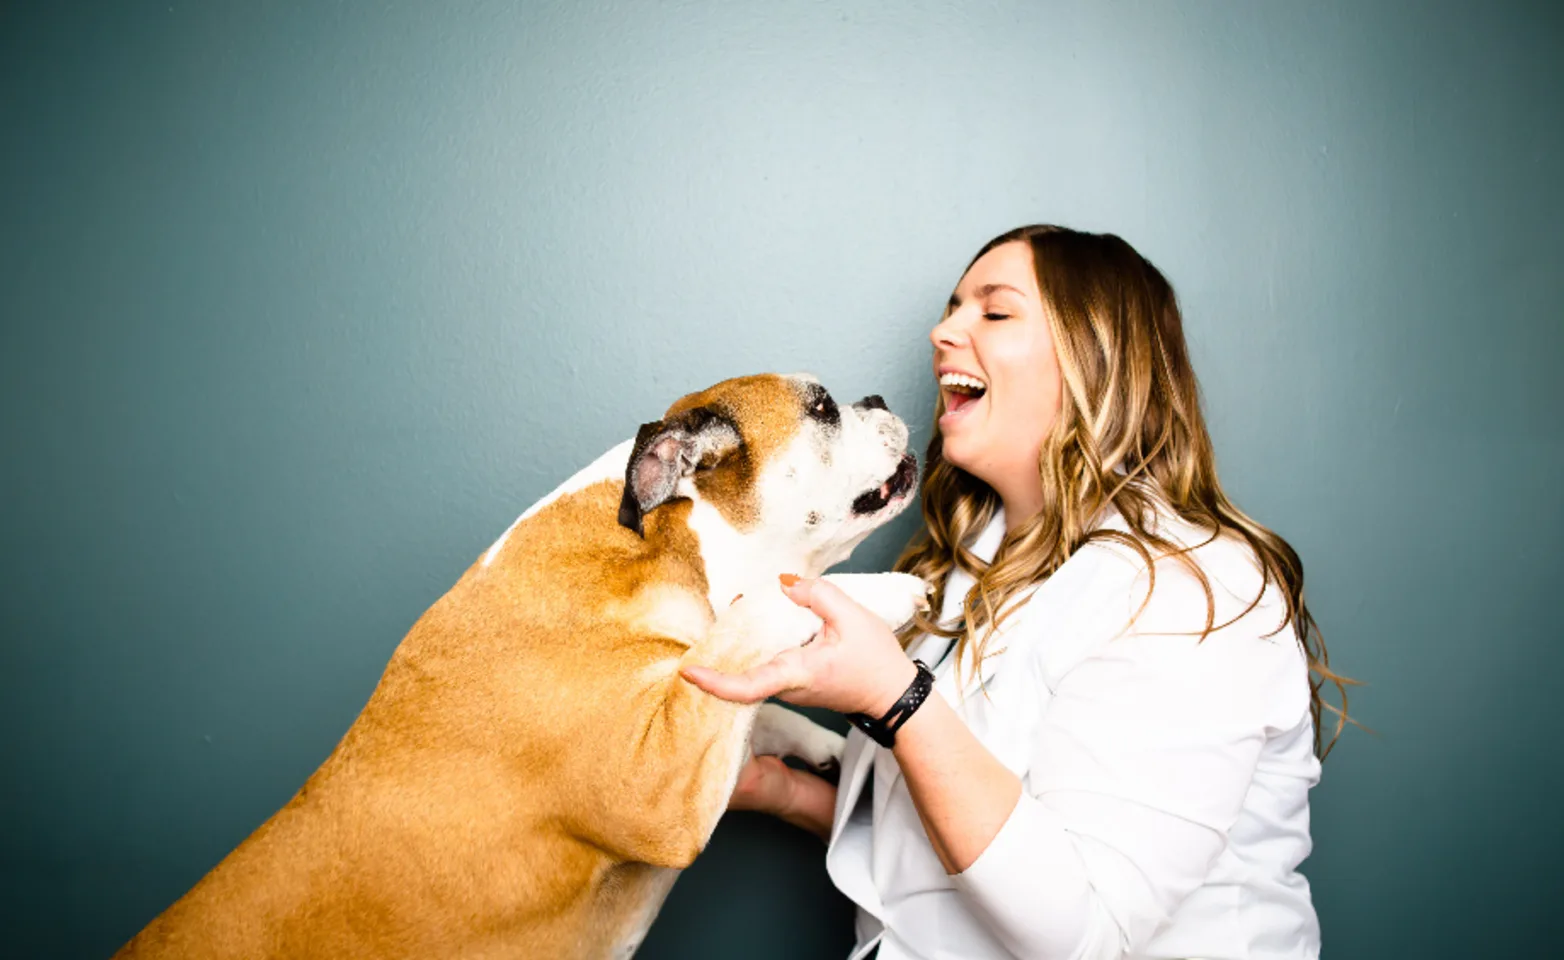 A photo of Dr. Zimprich and her bulldog